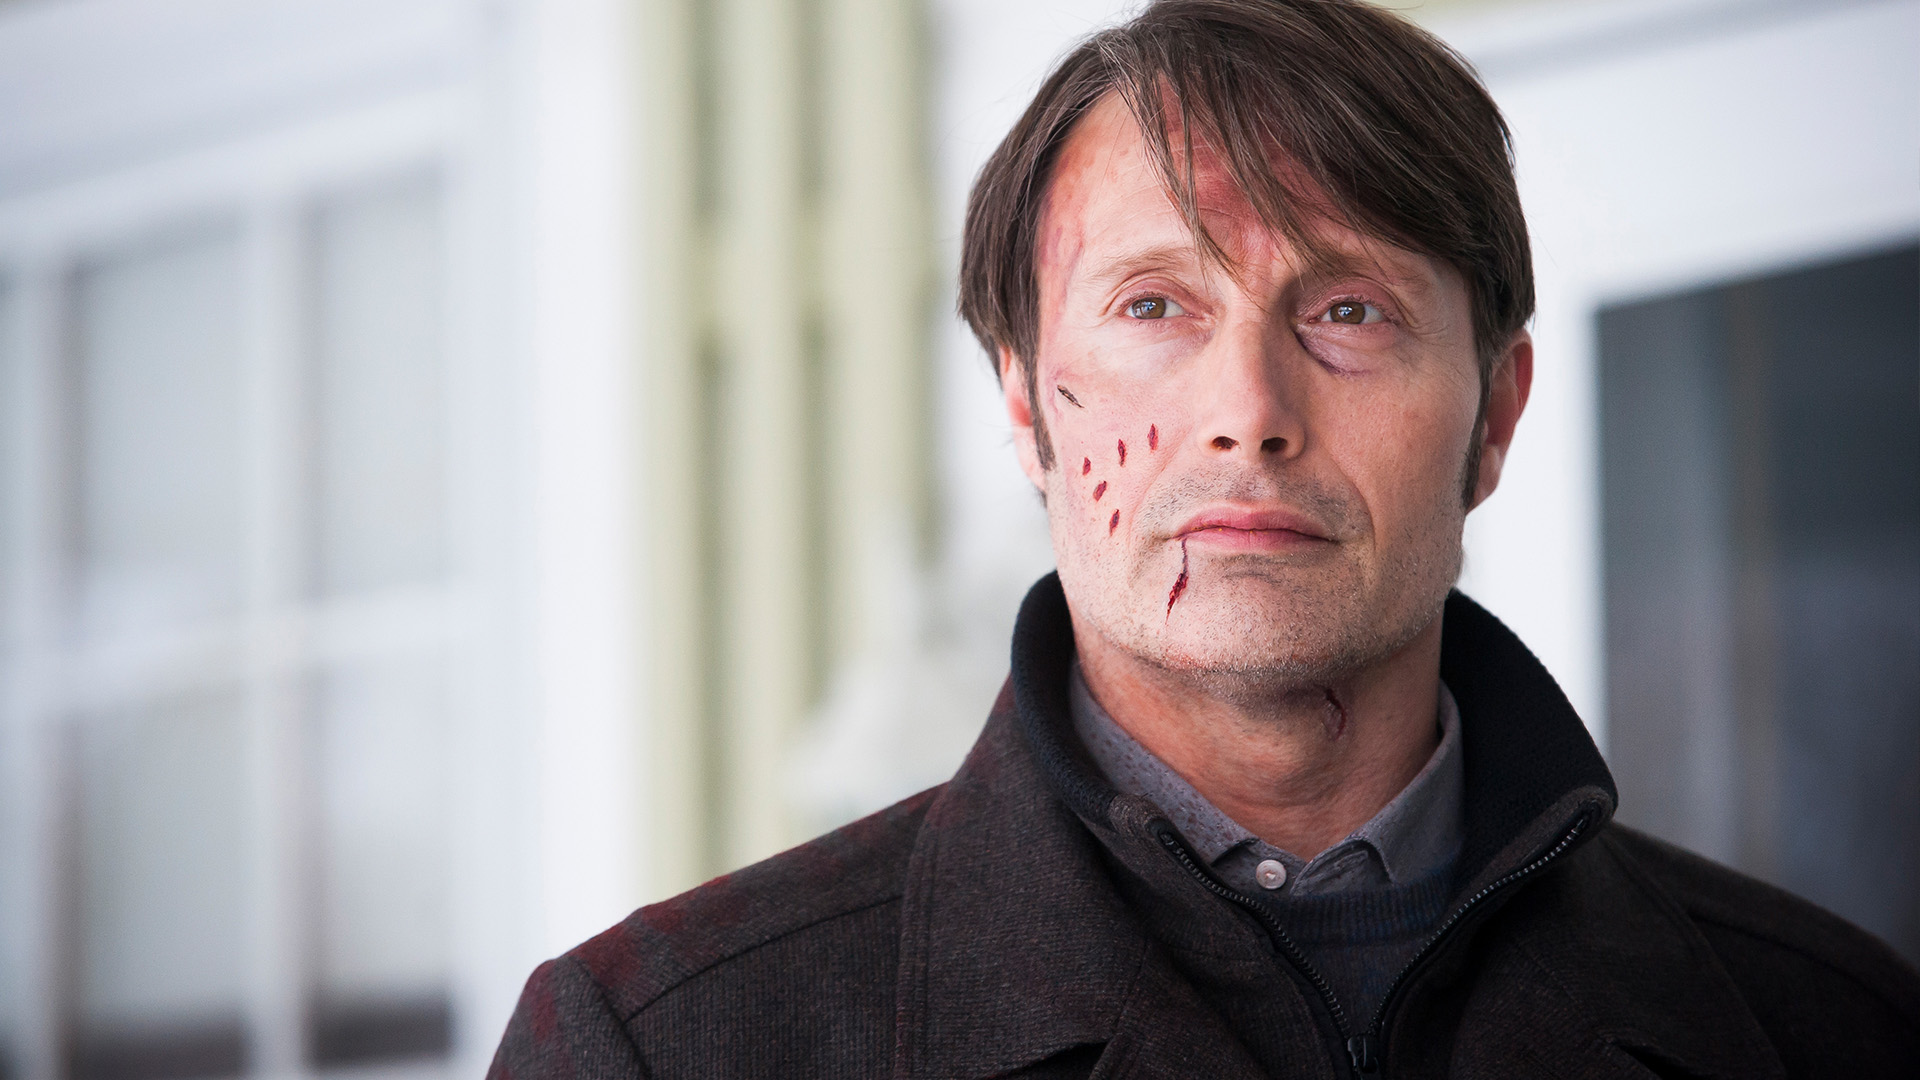 Digestivo, Hannibal and Will are captured in Italy., TV-MA, Season 1064850, Episode 7